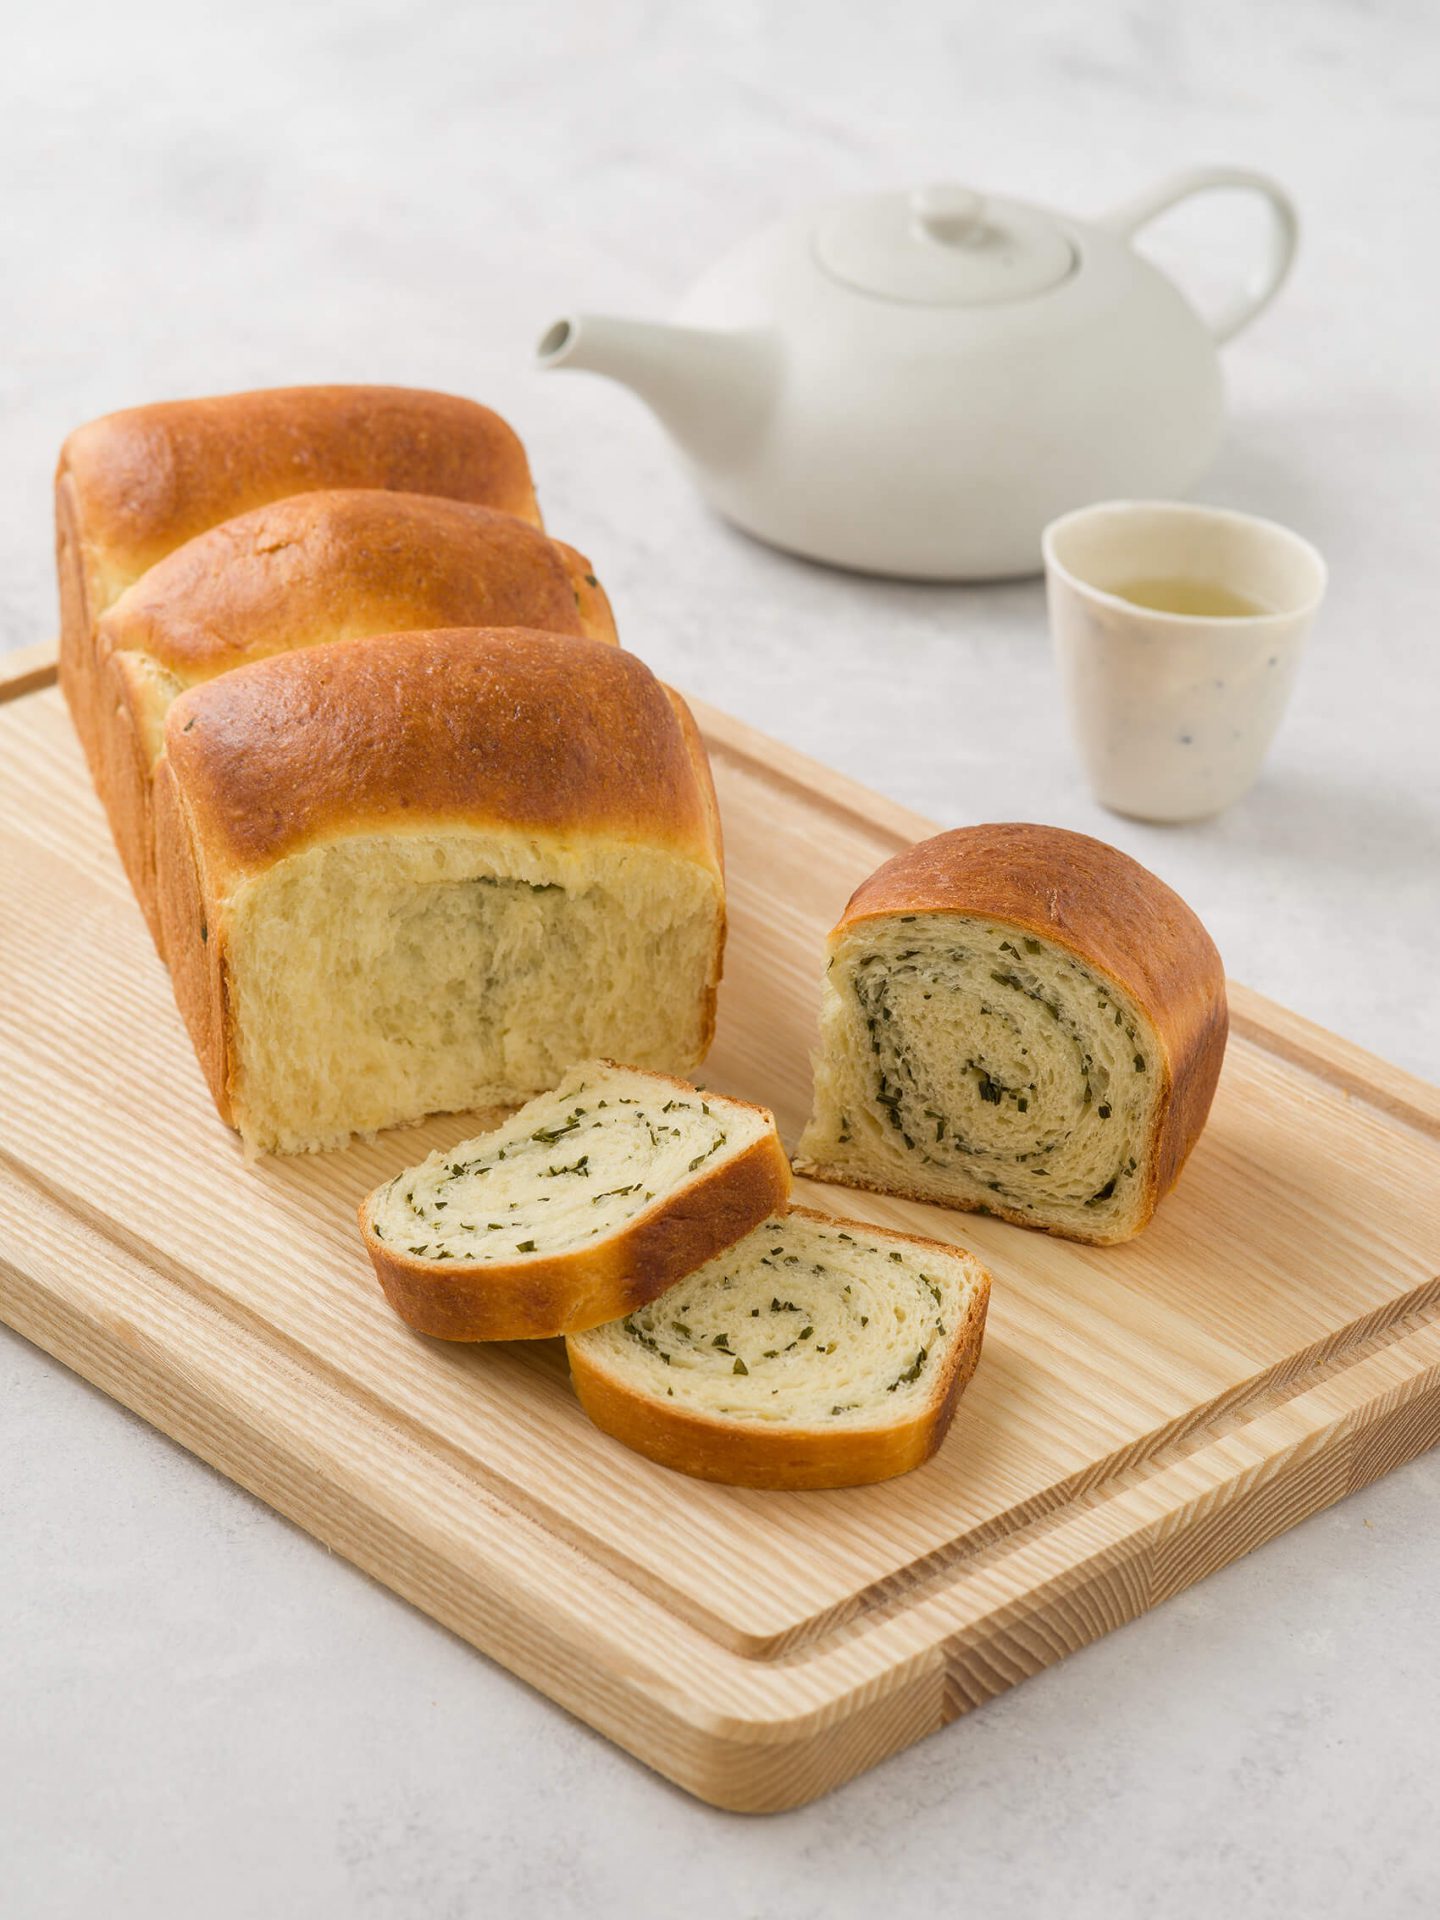 bake bread at home with Miele moisture plus